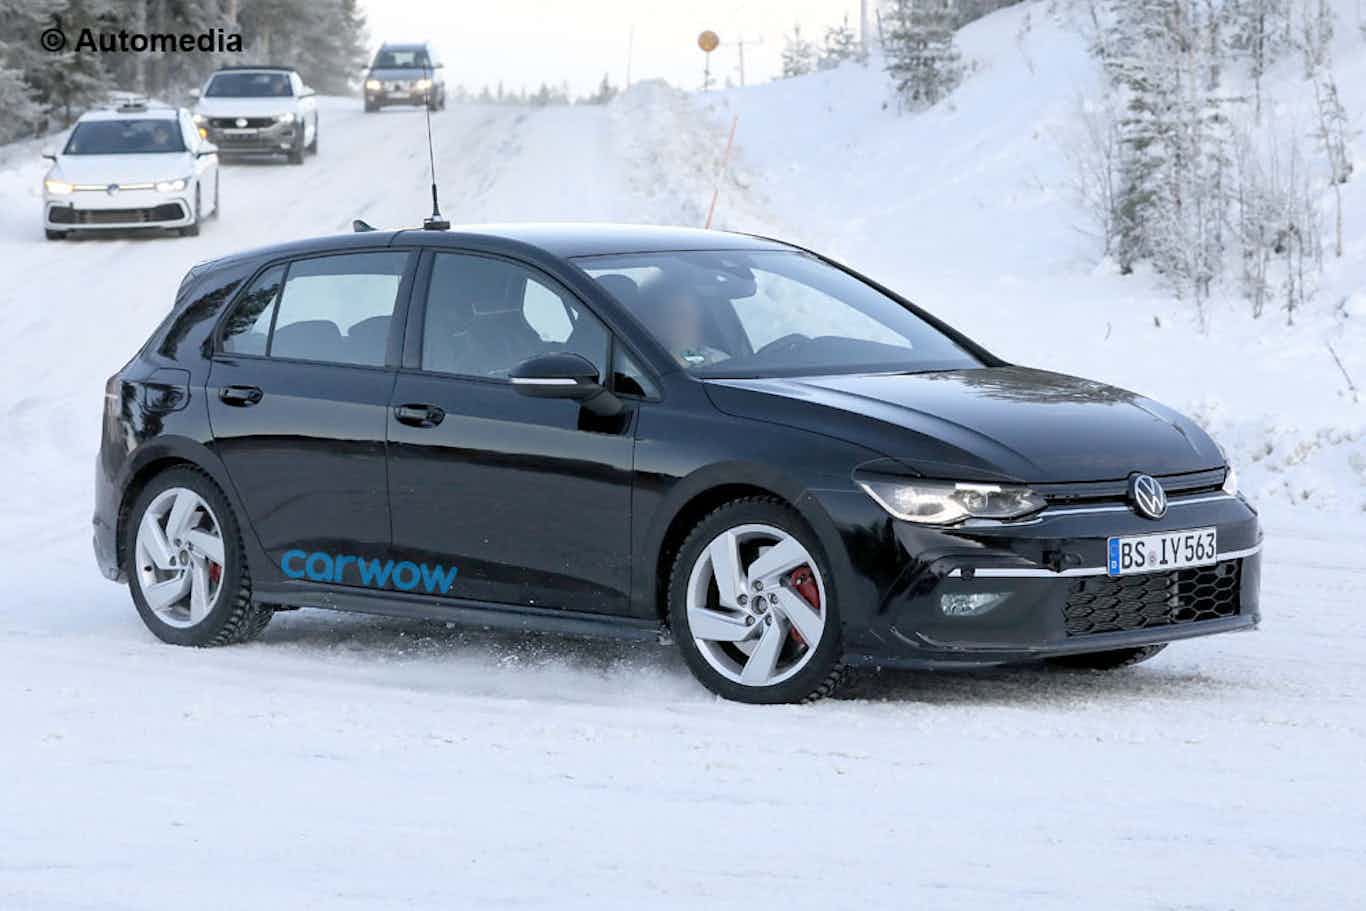 New 2020 Volkswagen Golf GTI spotted almost completely uncamouflaged